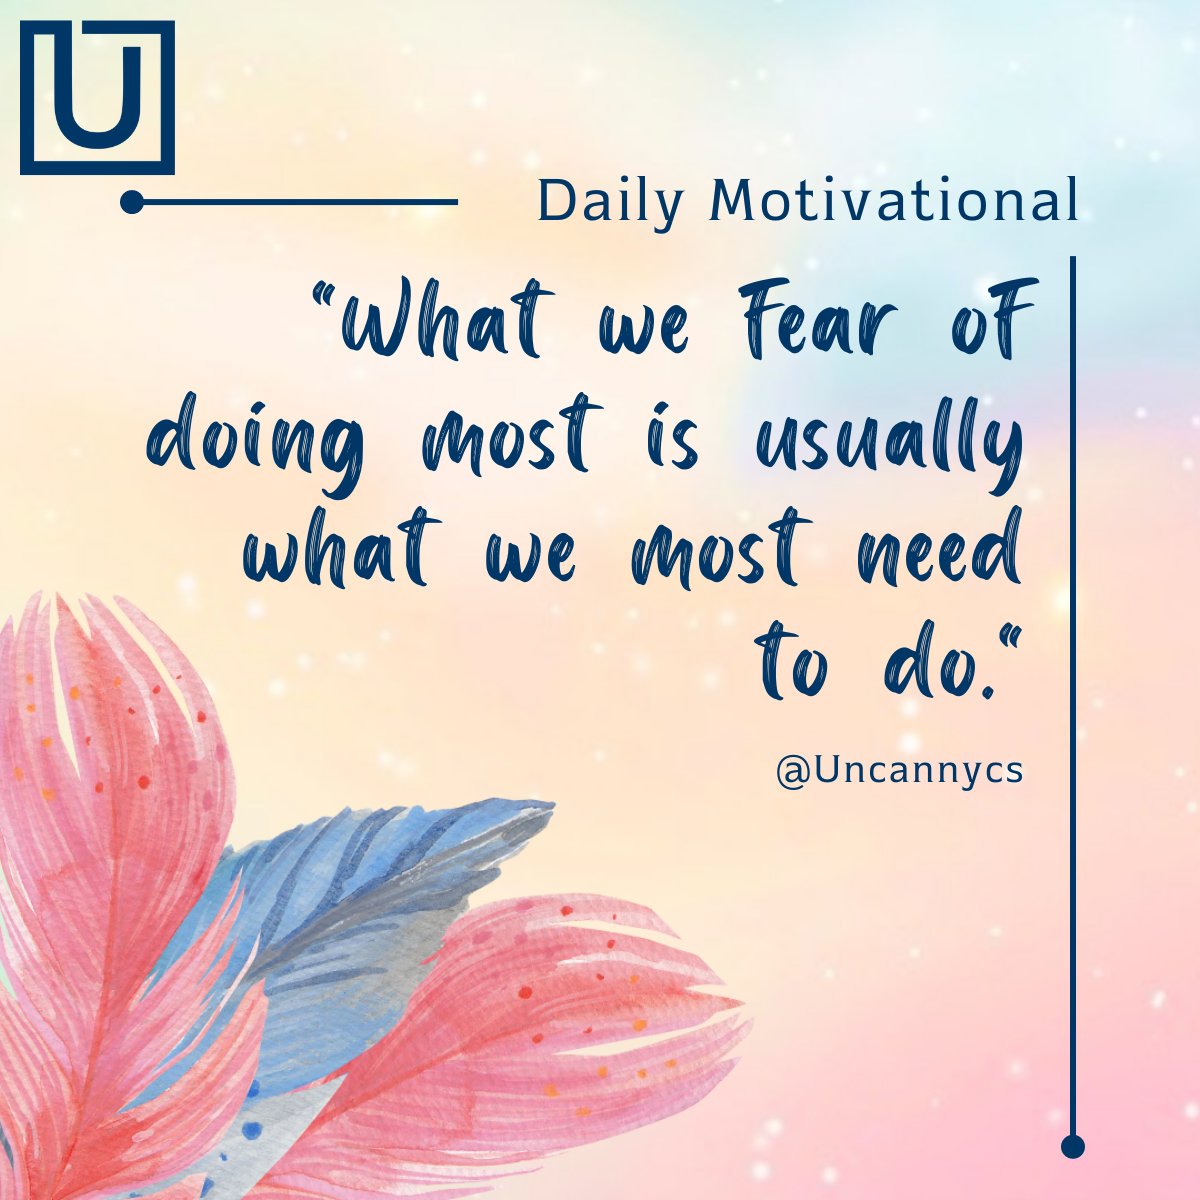 🌟'What we fear of doing most is usually what we most need to do.” 🌈
#FridayMotivation #TGIF #FriYAY #WeekendVibes #FeelGoodFriday #FridayFeeling #FriNally #WeekendWarrior #FriYAYvibes #FridayInspiration #FridayGoals #HappyFriday #FridayMood #FriYAYFeels #FridayVibes #DreamBig